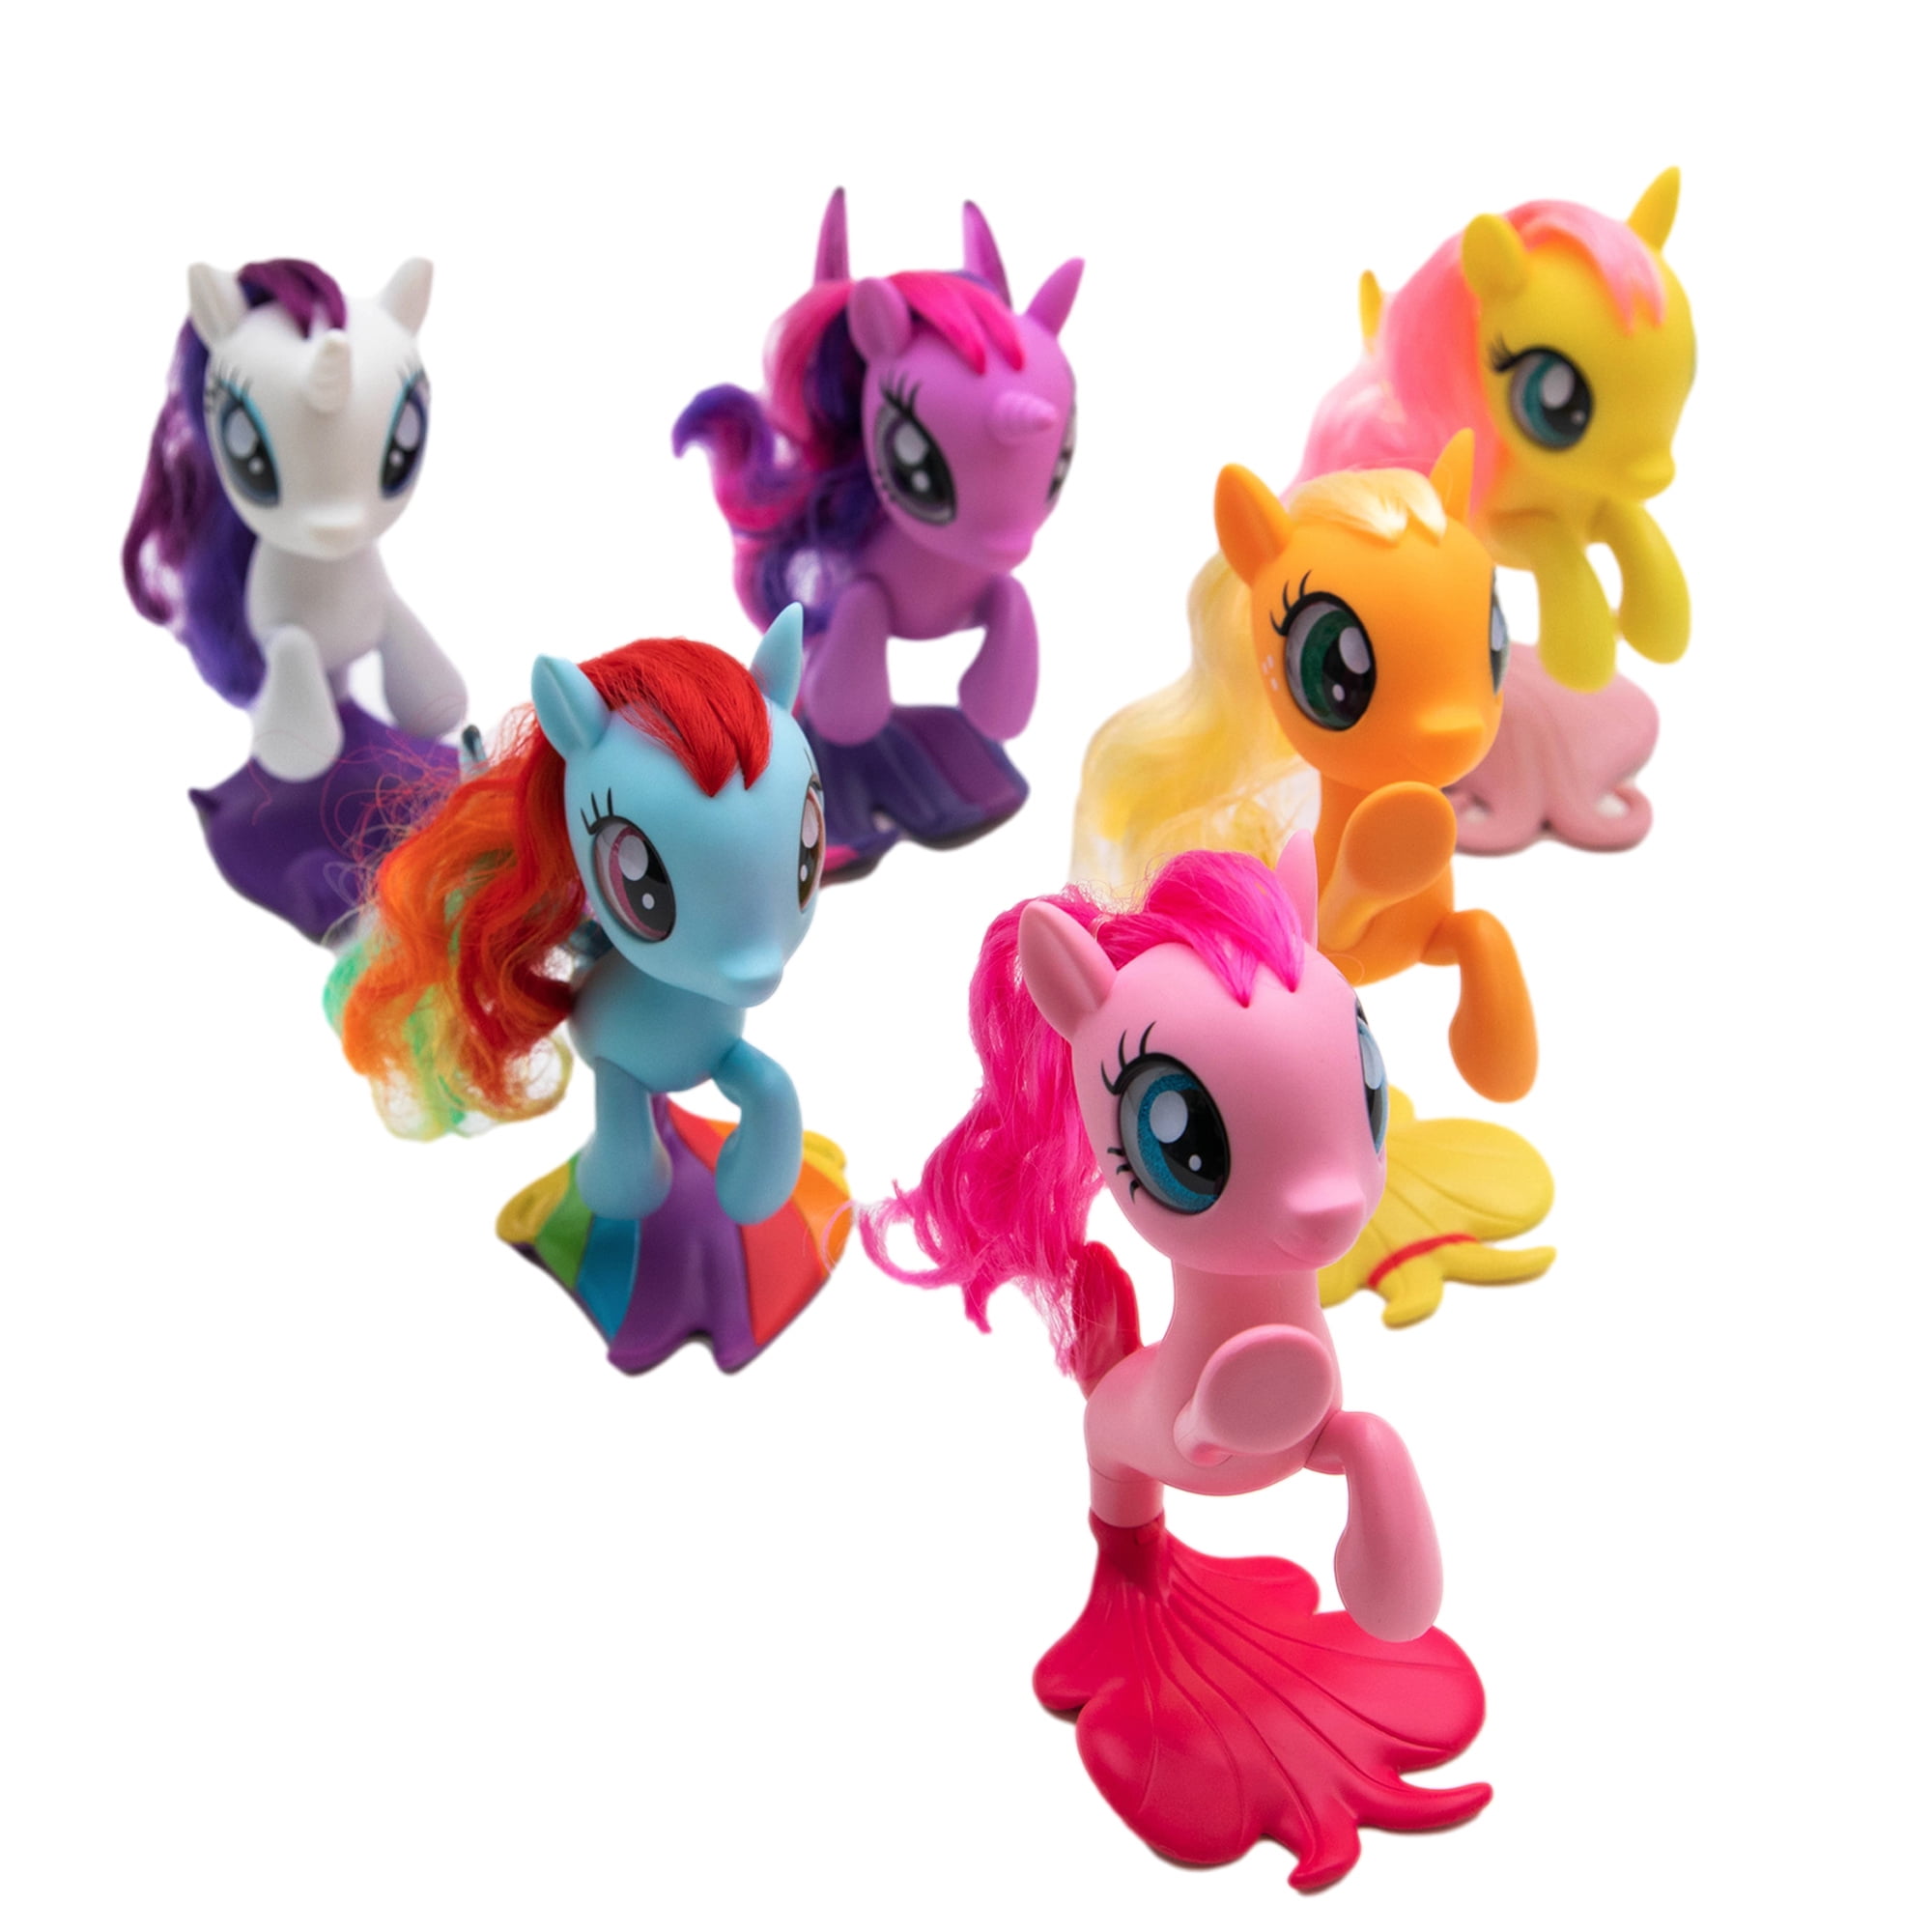 NEW MY LITTLE PONY THE MOVIE PLUG-IN LED KIDS NIGHT LIGHT. 